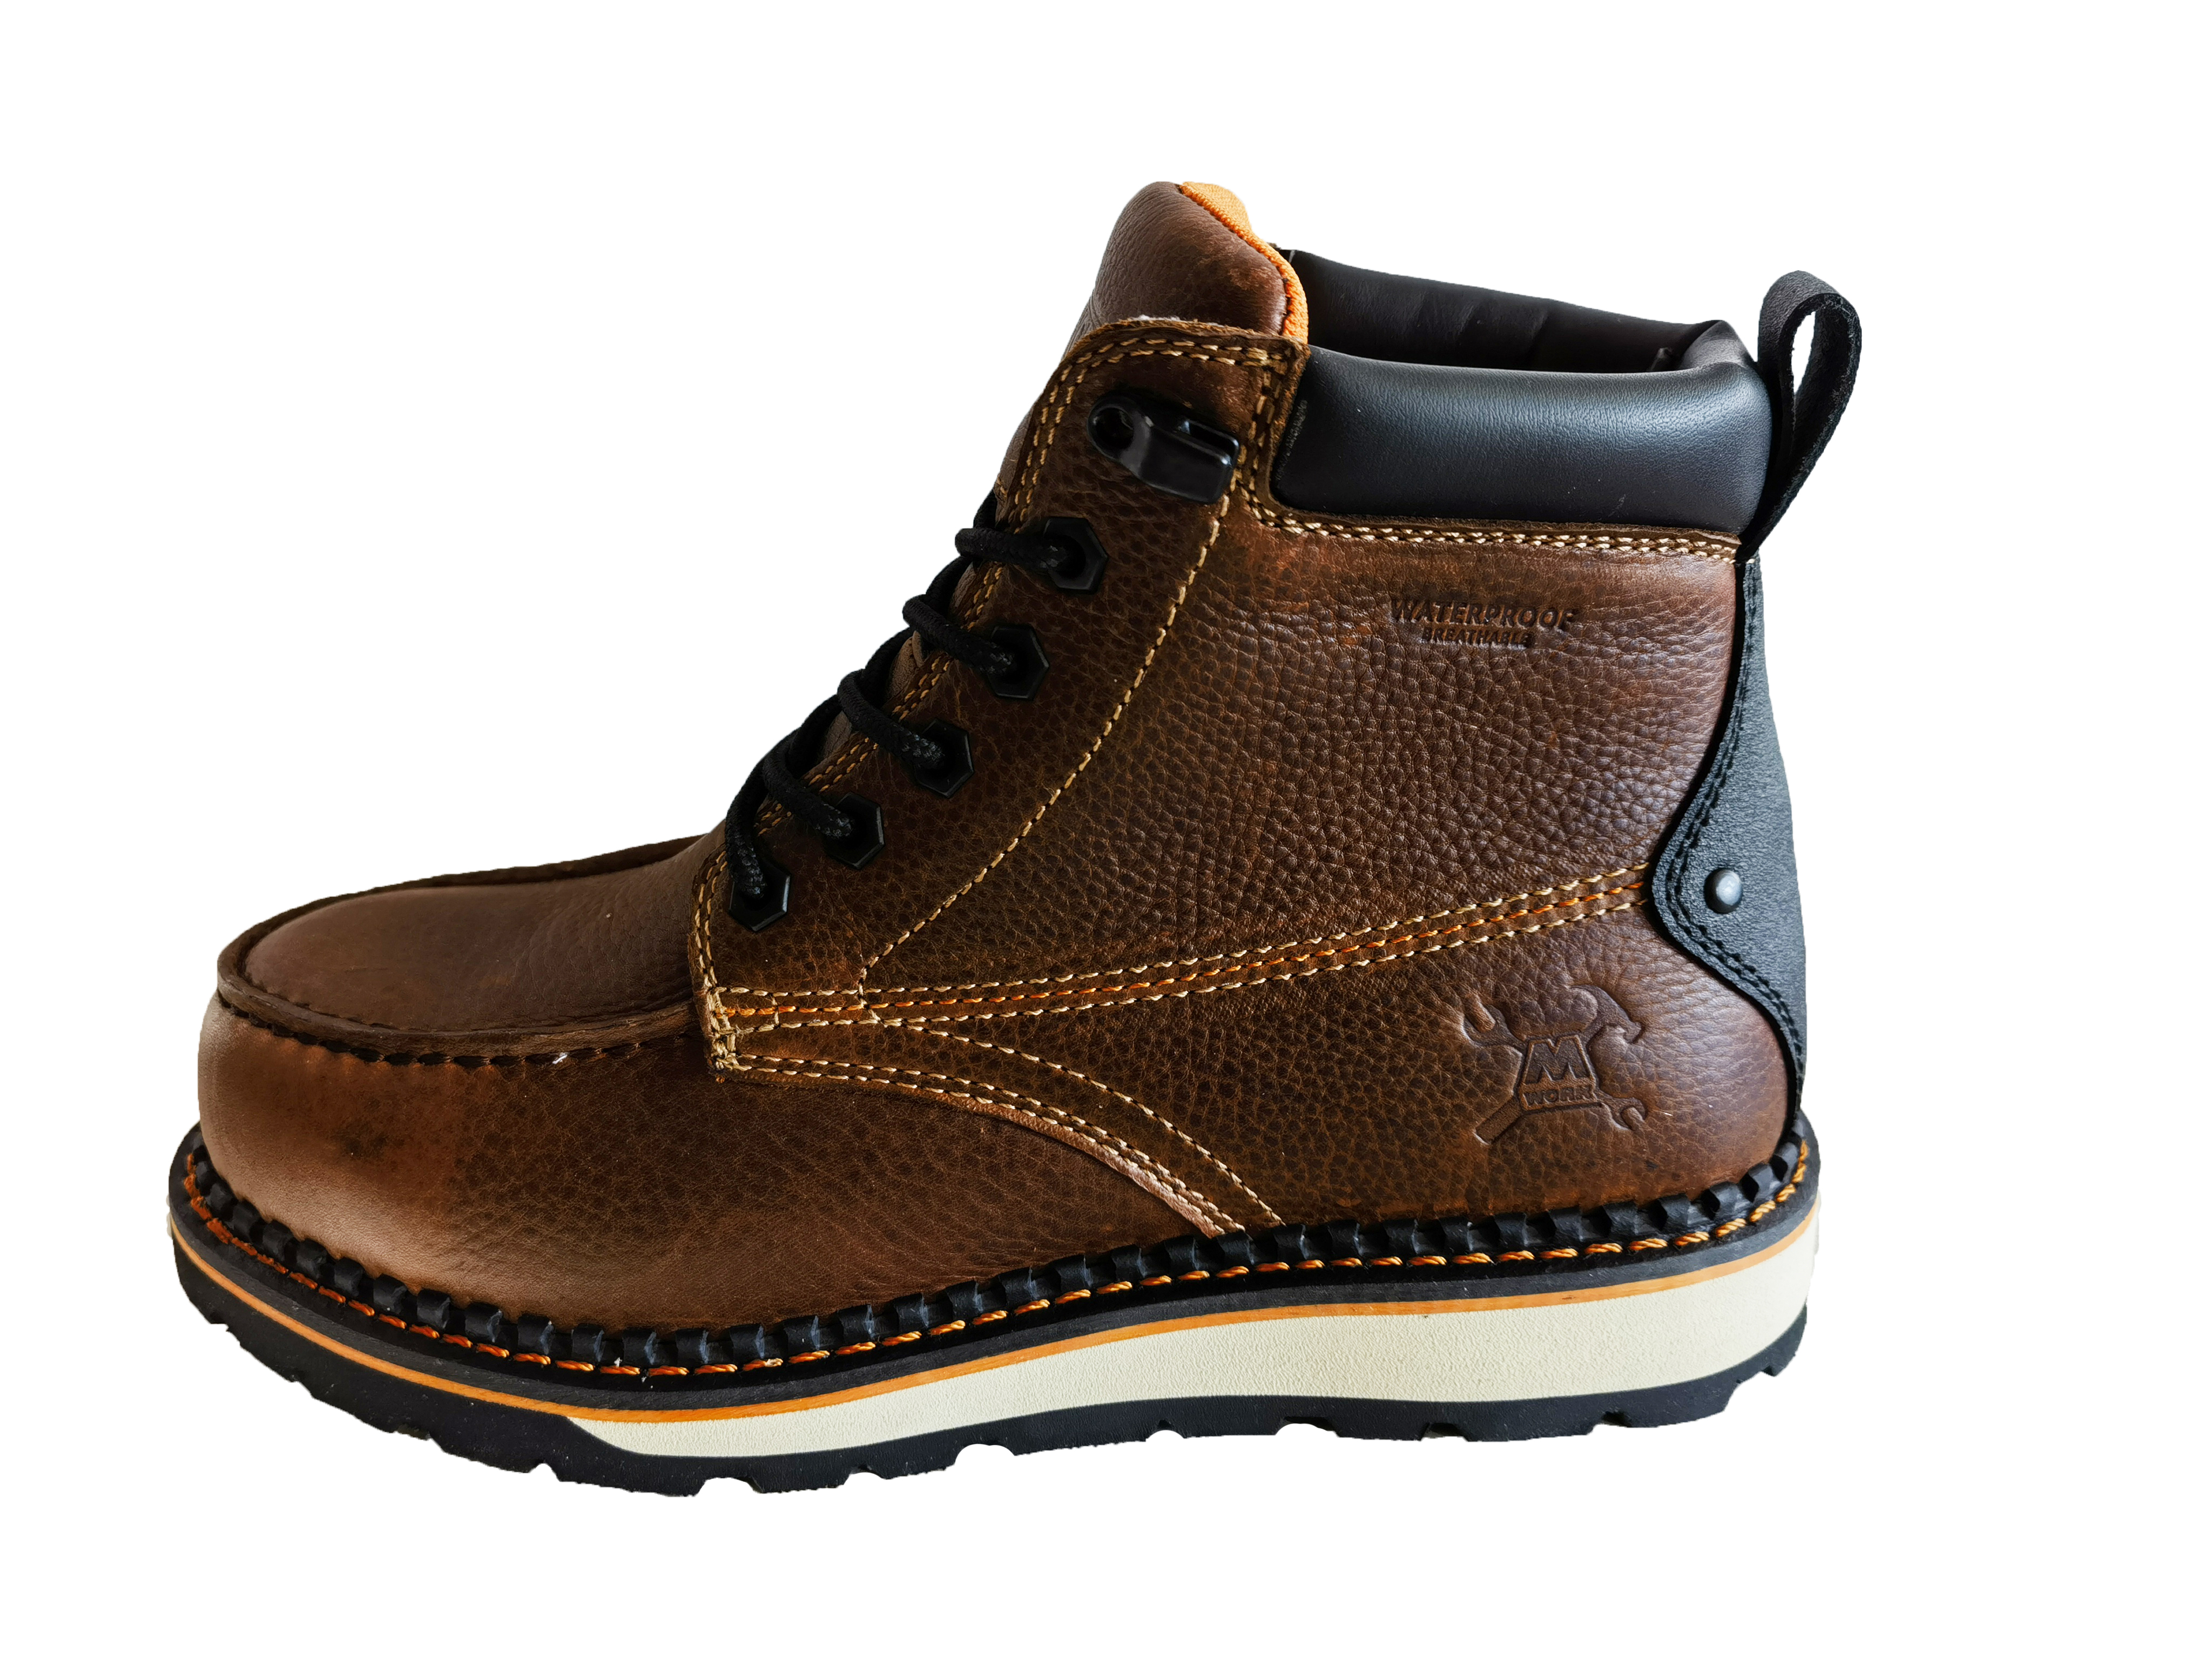 Top Rated Safety Shoes: Ensuring Truck Driver's Safety on the Road